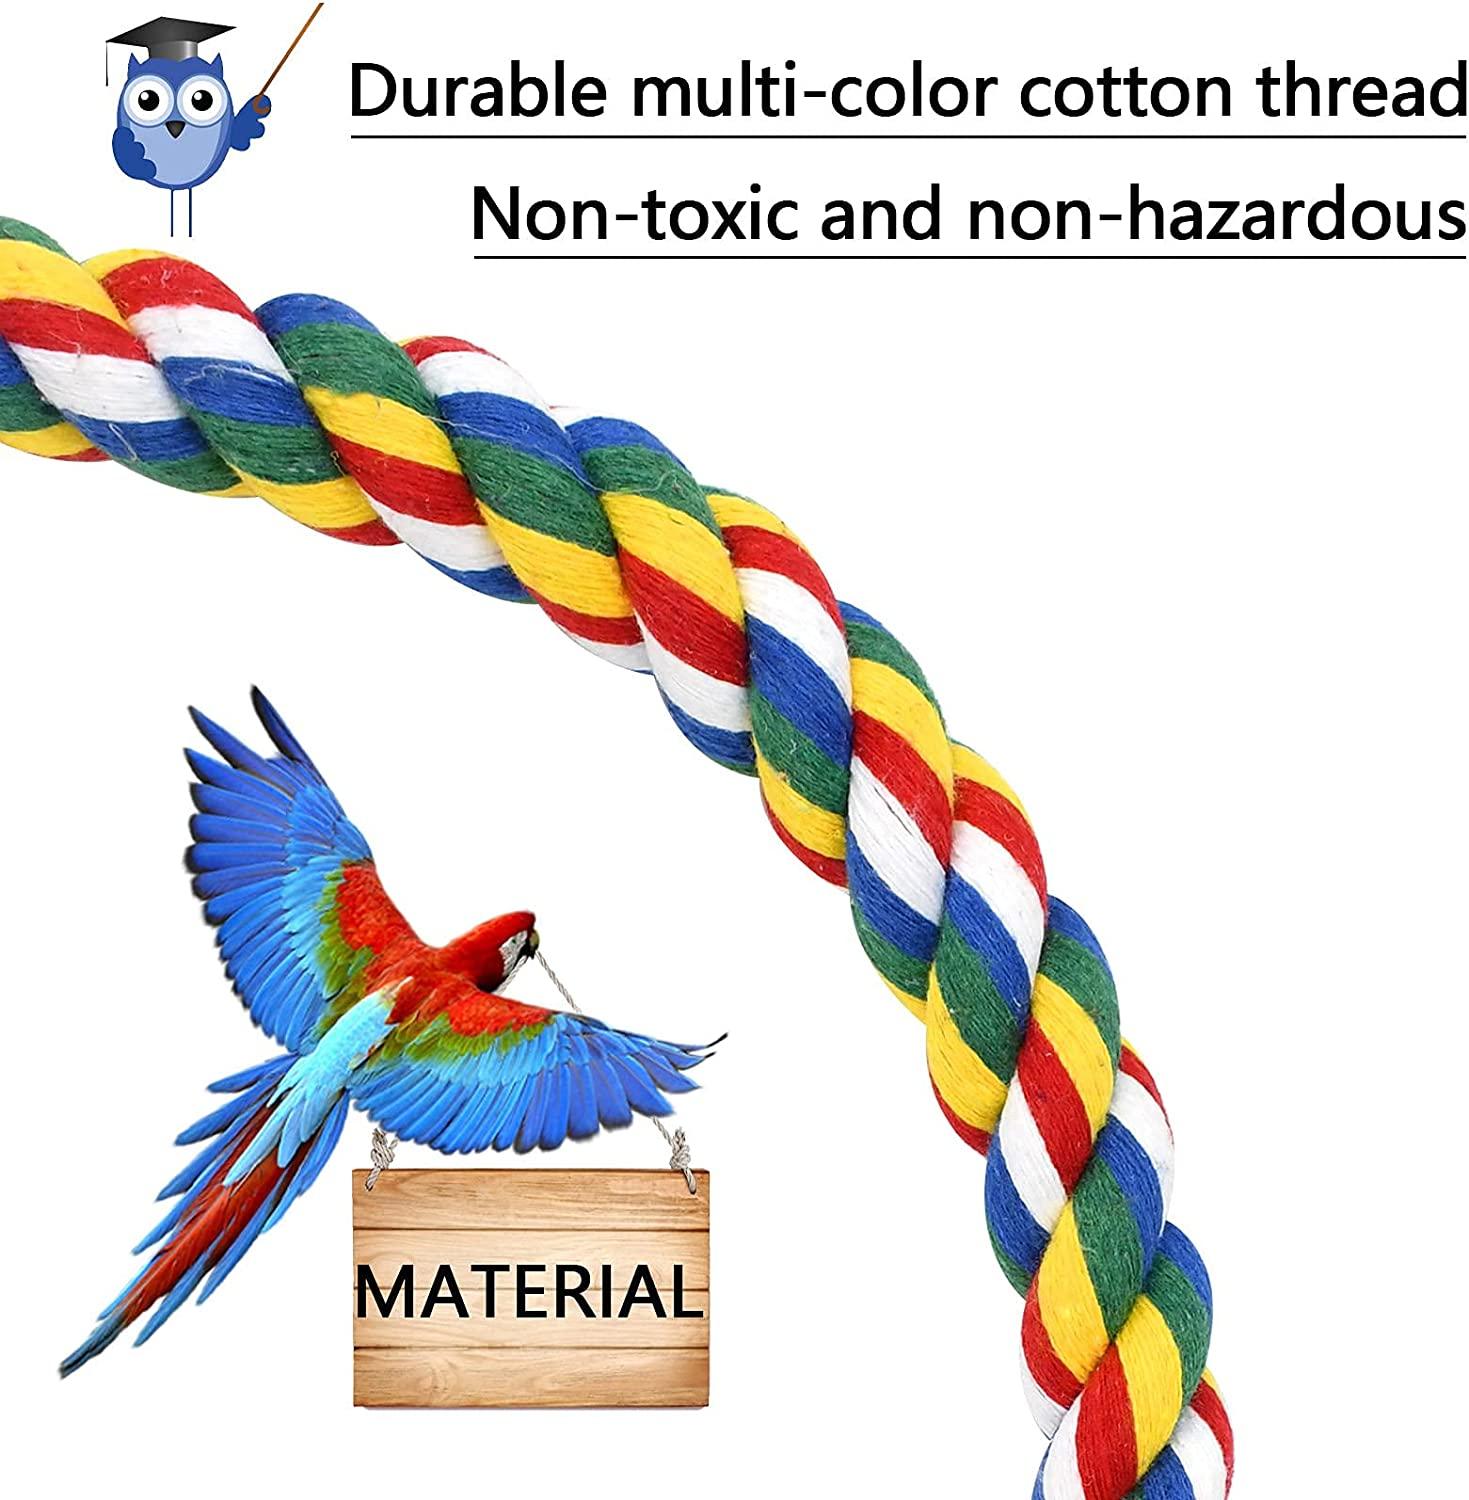  Bird Rope Perch for Parrots, Cockatiels, Parakeets, Budgie  Cages Comfy Birds Colorful Rope Perches Toy (41inch Metal nut) : Pet  Supplies